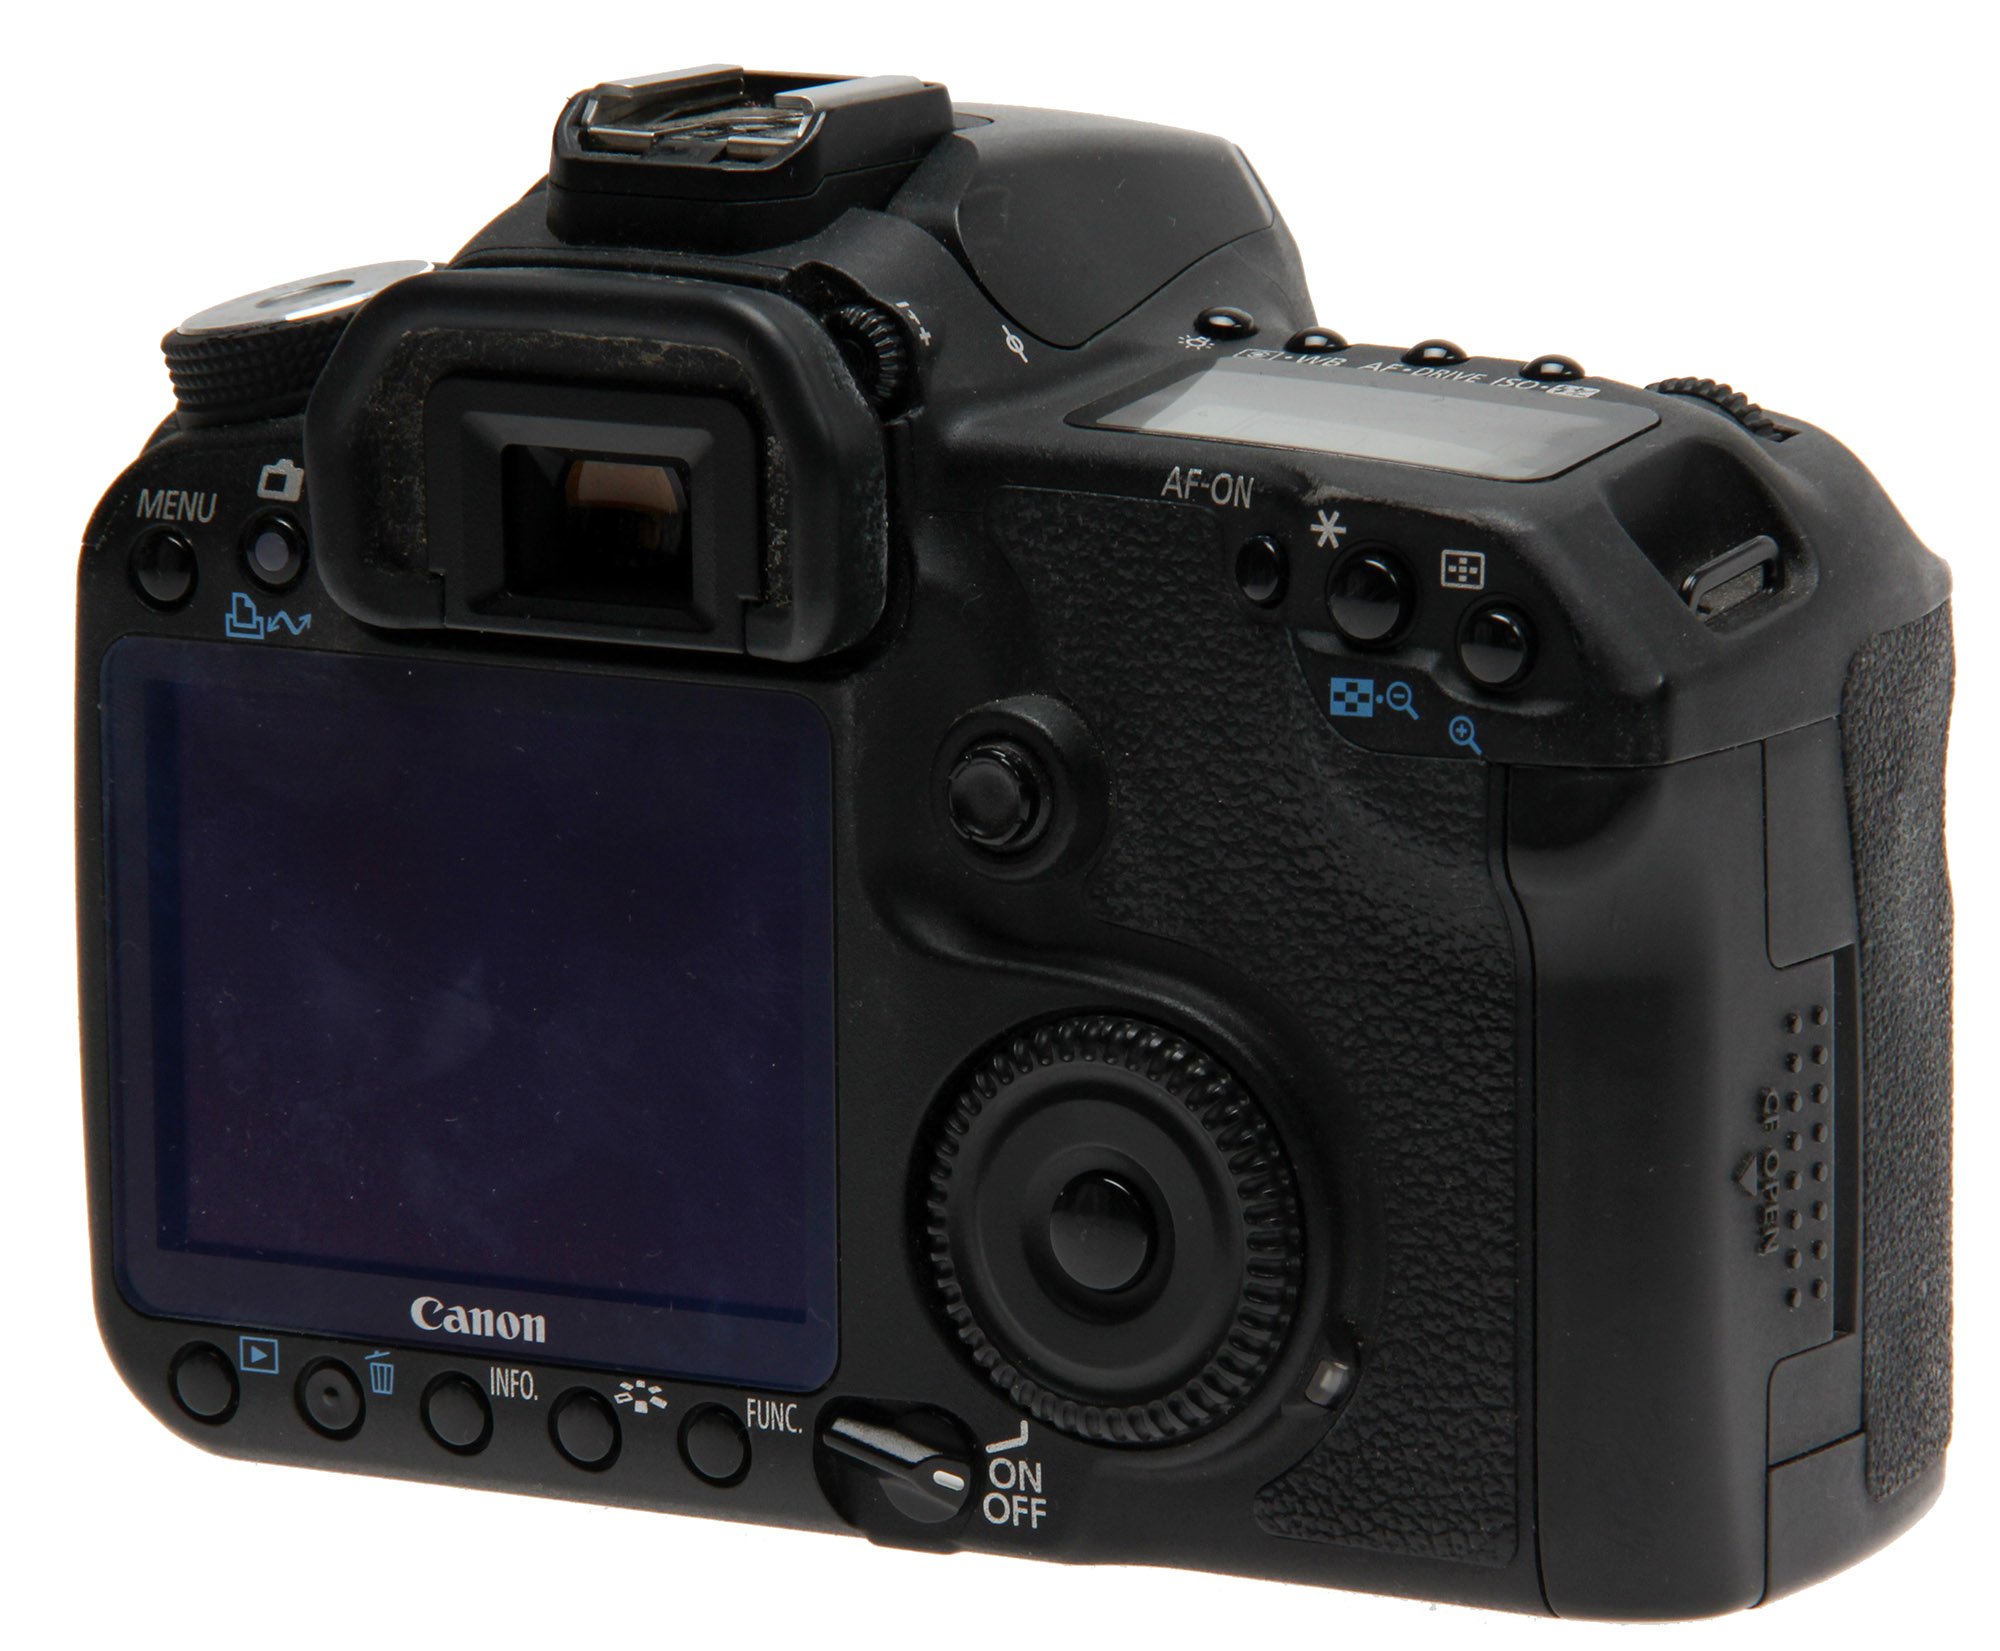 Canon EOS 50D DSLR Camera (Body Only) (Discontinued by Manufacturer)